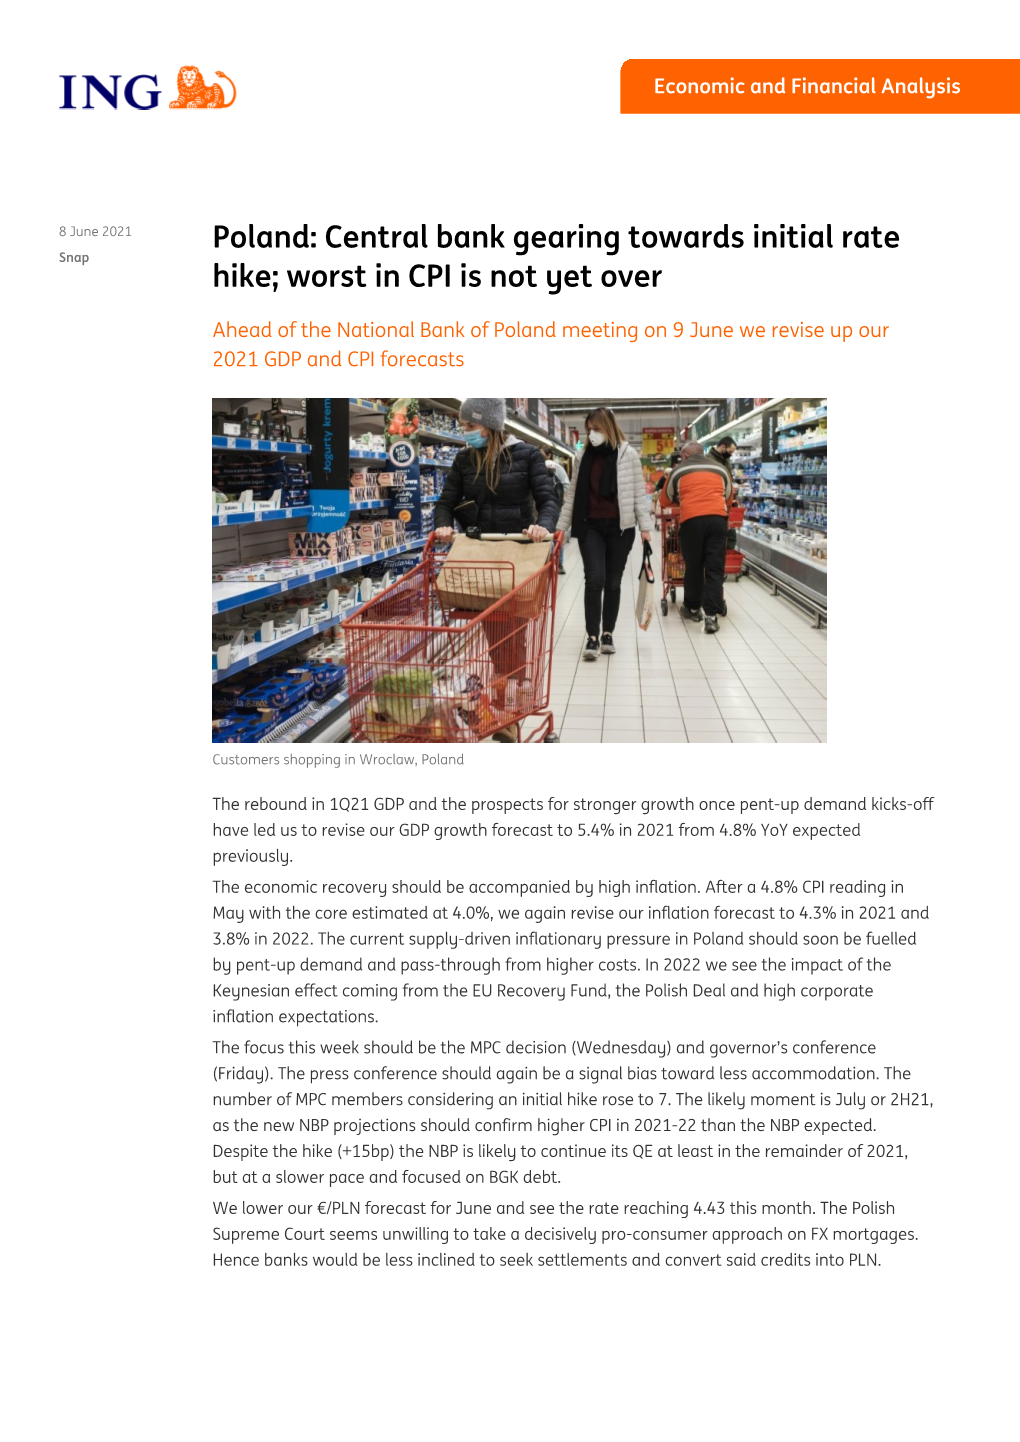 Poland: Central Bank Gearing Towards Initial Rate Hike; Worst in CPI Is Not Yet Over